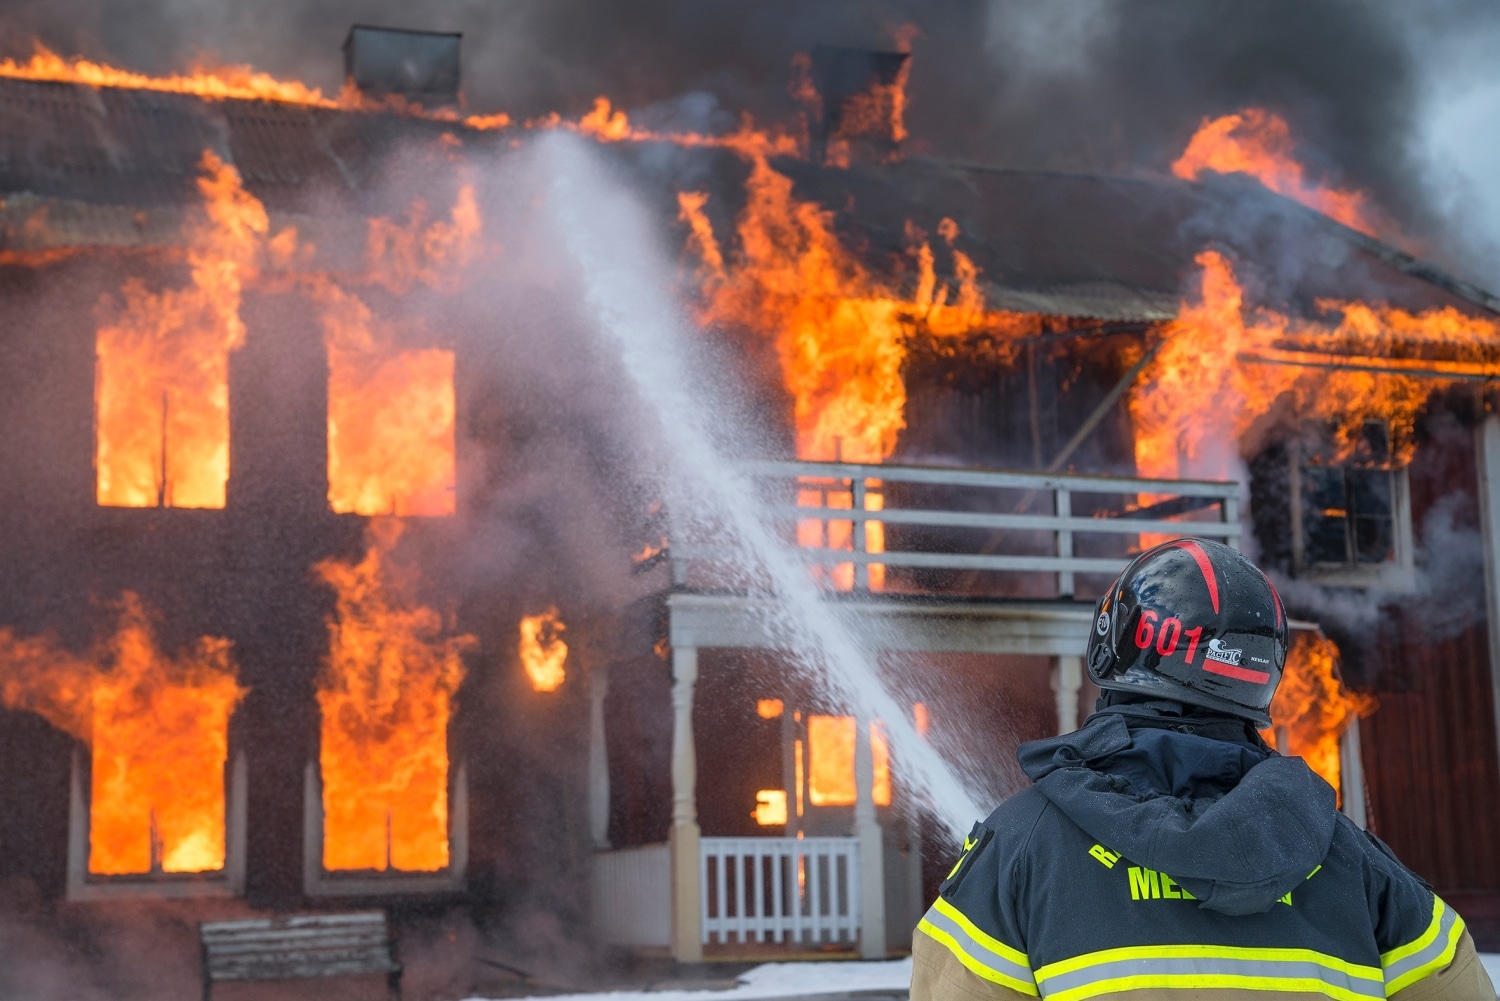 Protect your home with Crime Intervention Alarm fire protection services